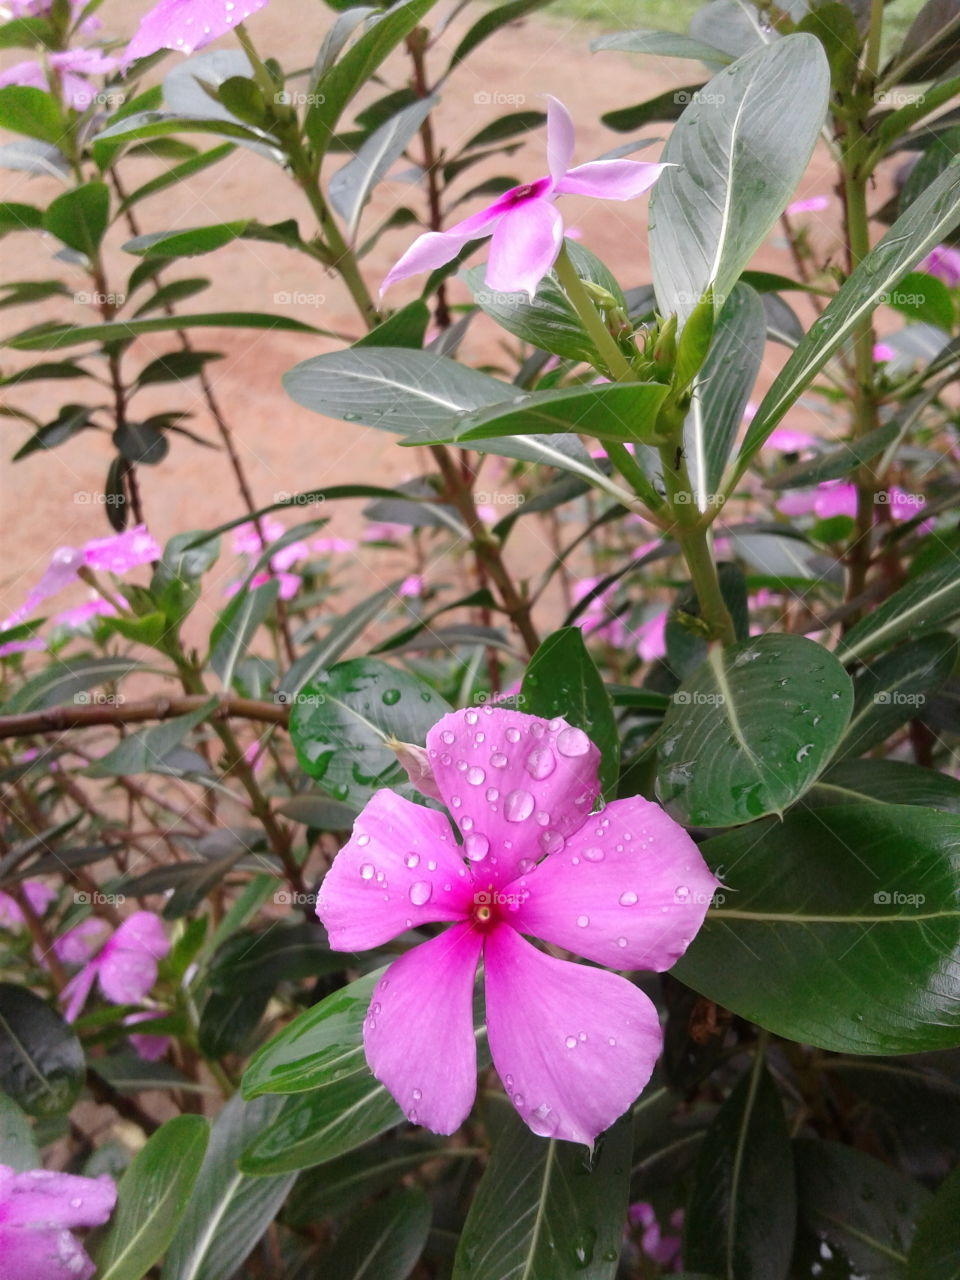 Periwinkle flowers, vinca rosea, catharanthus roseus, sadabahar. it's available 12th month in the year, also a ayurvedic medicine.